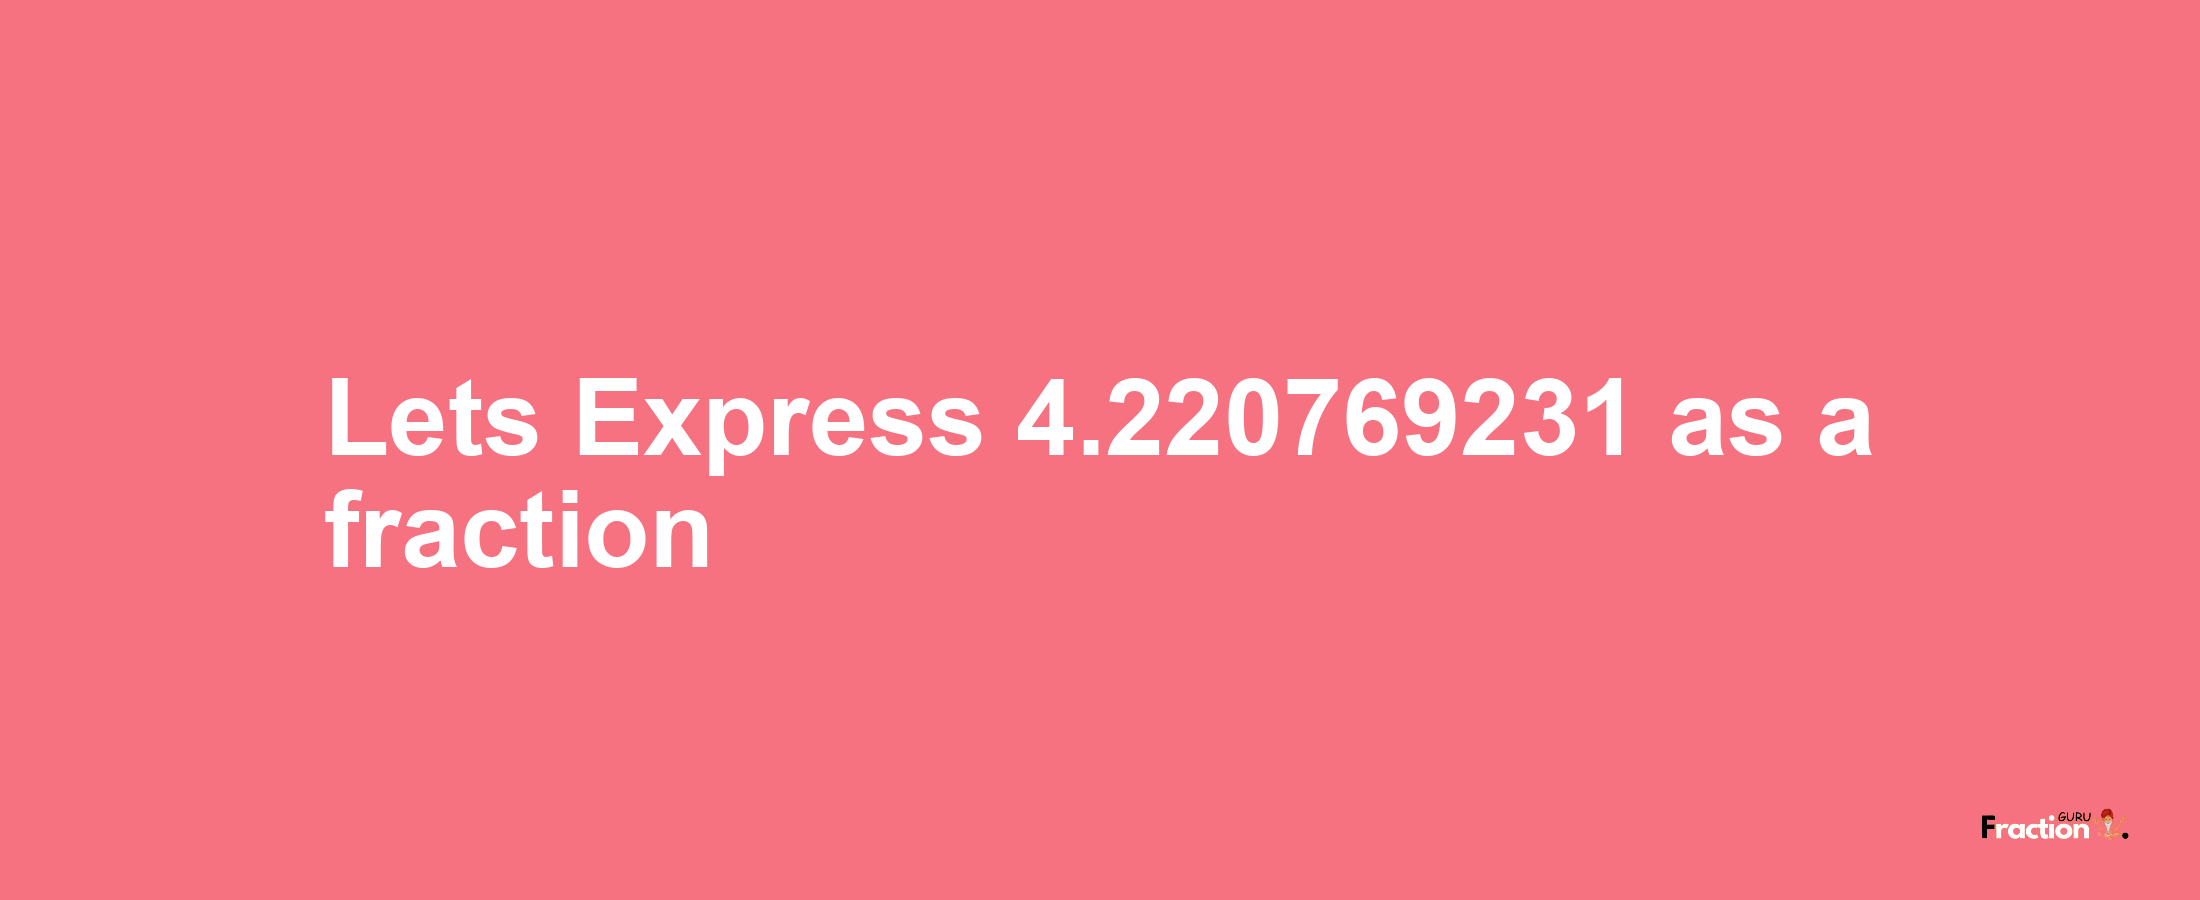 Lets Express 4.220769231 as afraction